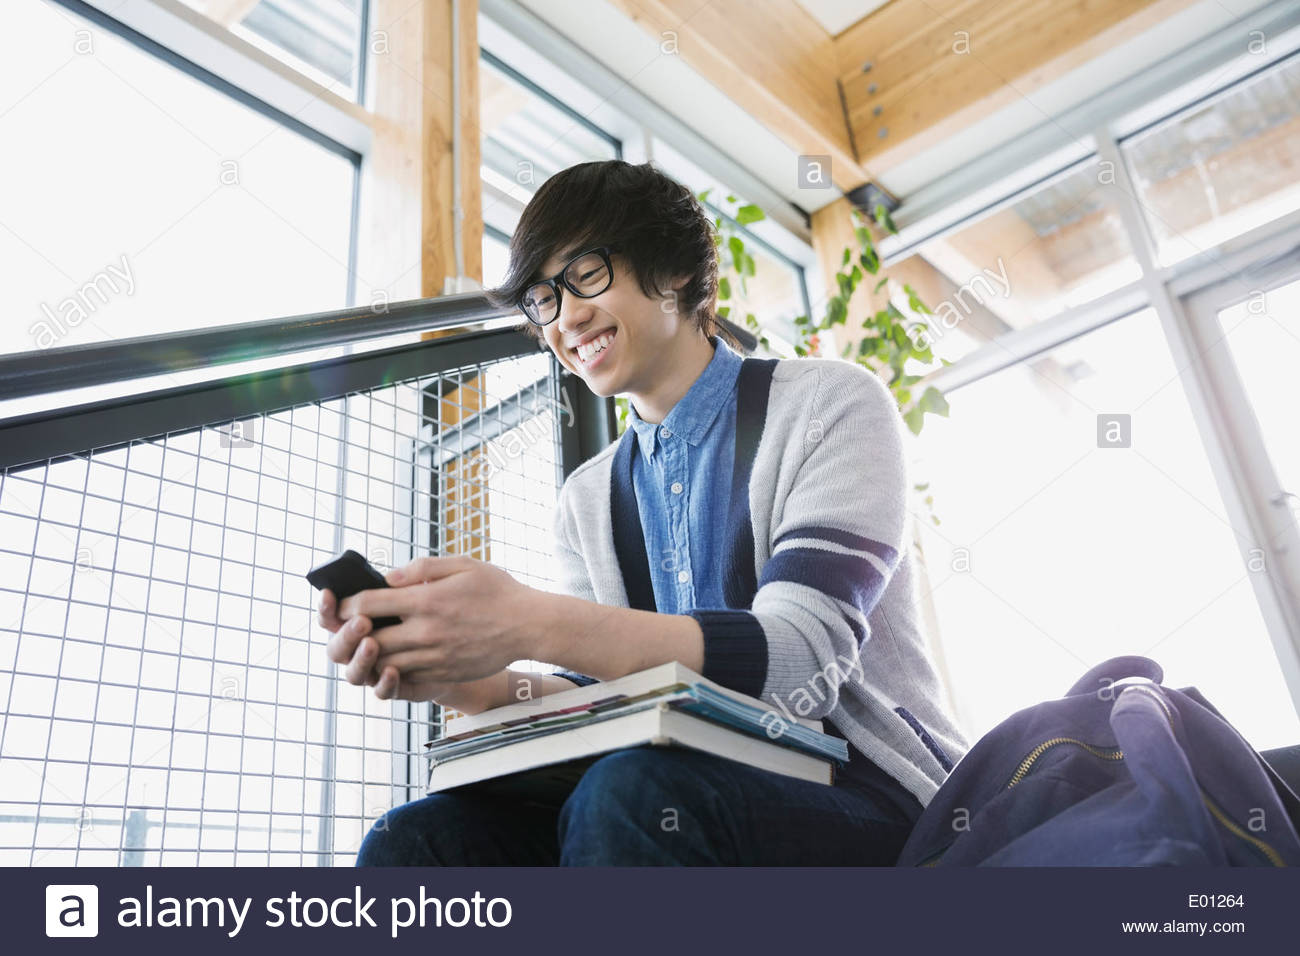 High school boy text messaging with cell phone Stock Photo